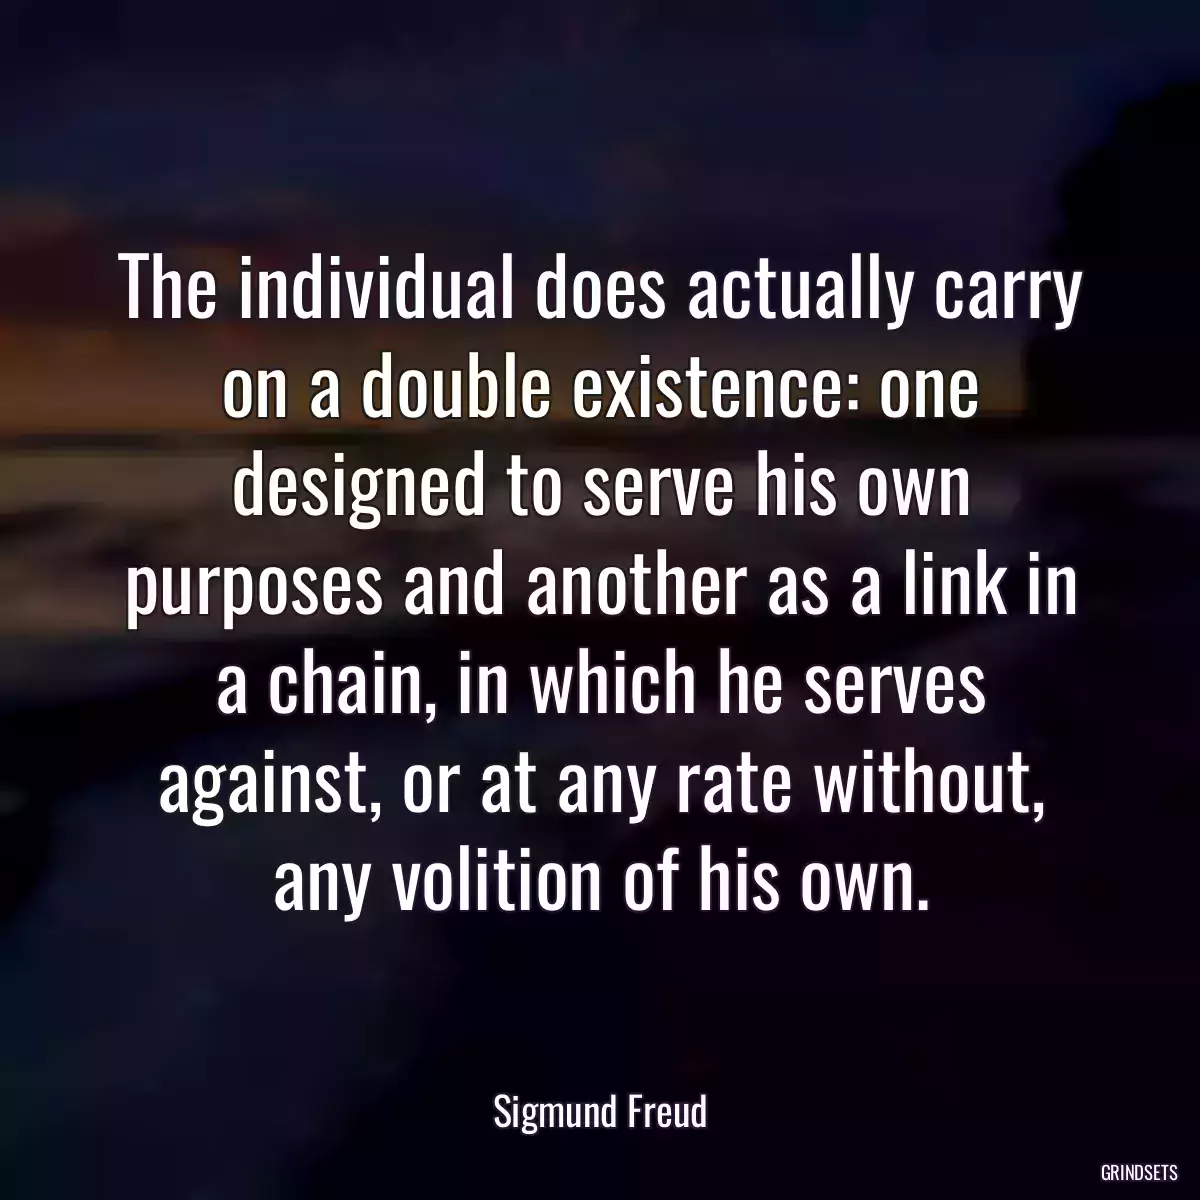 The individual does actually carry on a double existence: one designed to serve his own purposes and another as a link in a chain, in which he serves against, or at any rate without, any volition of his own.